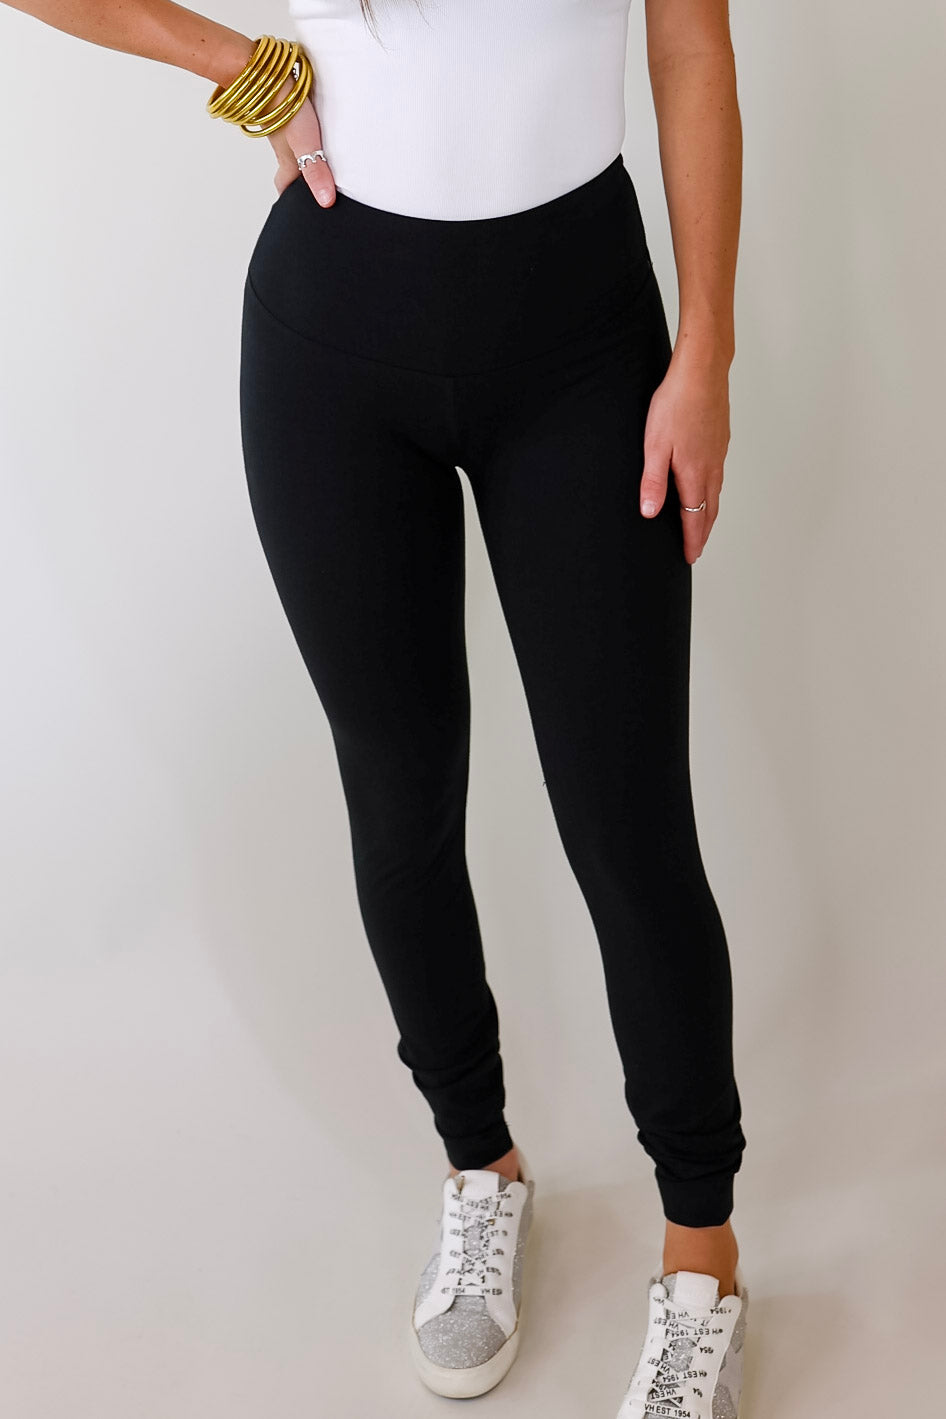 Lyssé | Classic Cotton Leggings in Black - Giddy Up Glamour Boutique